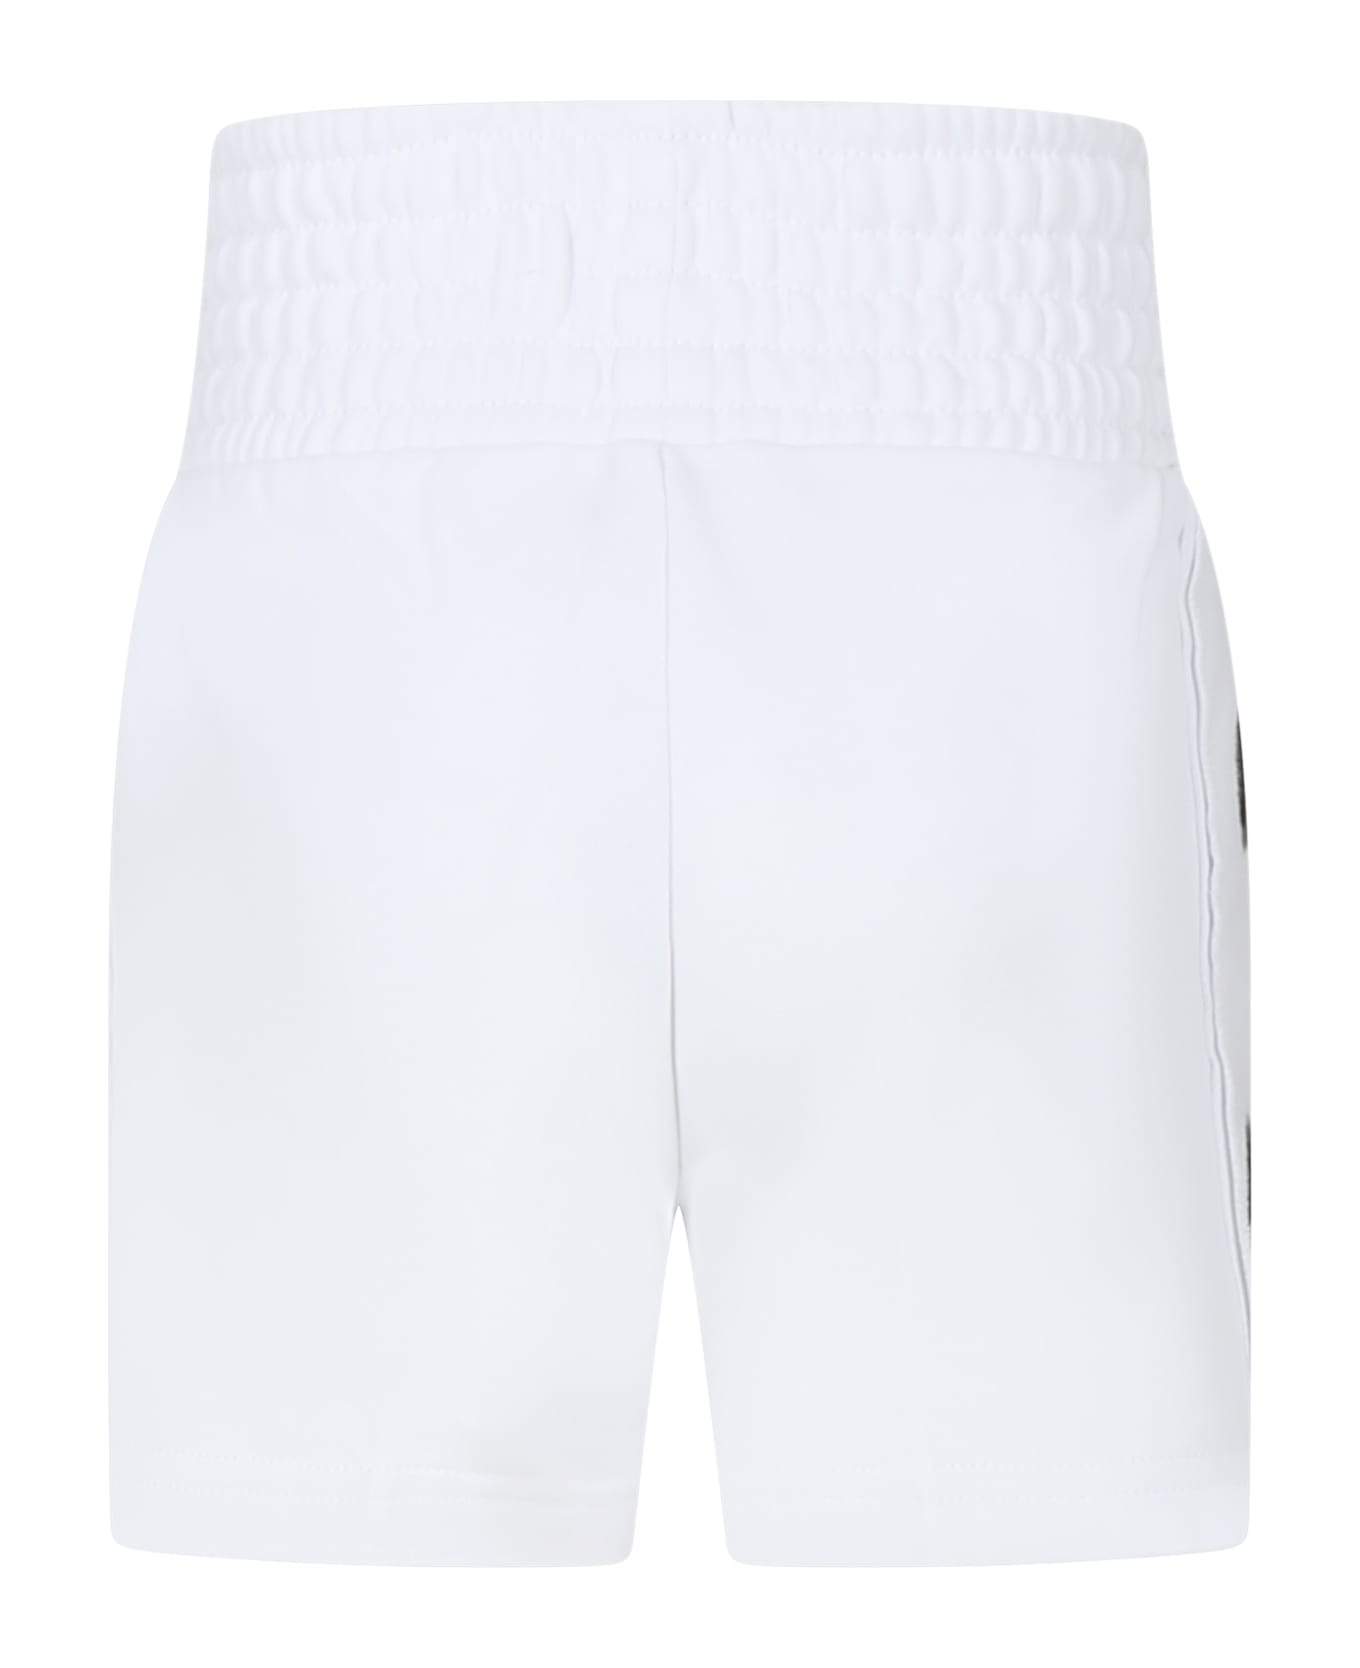 DKNY White Casual Shorts For Girl With Logo - White